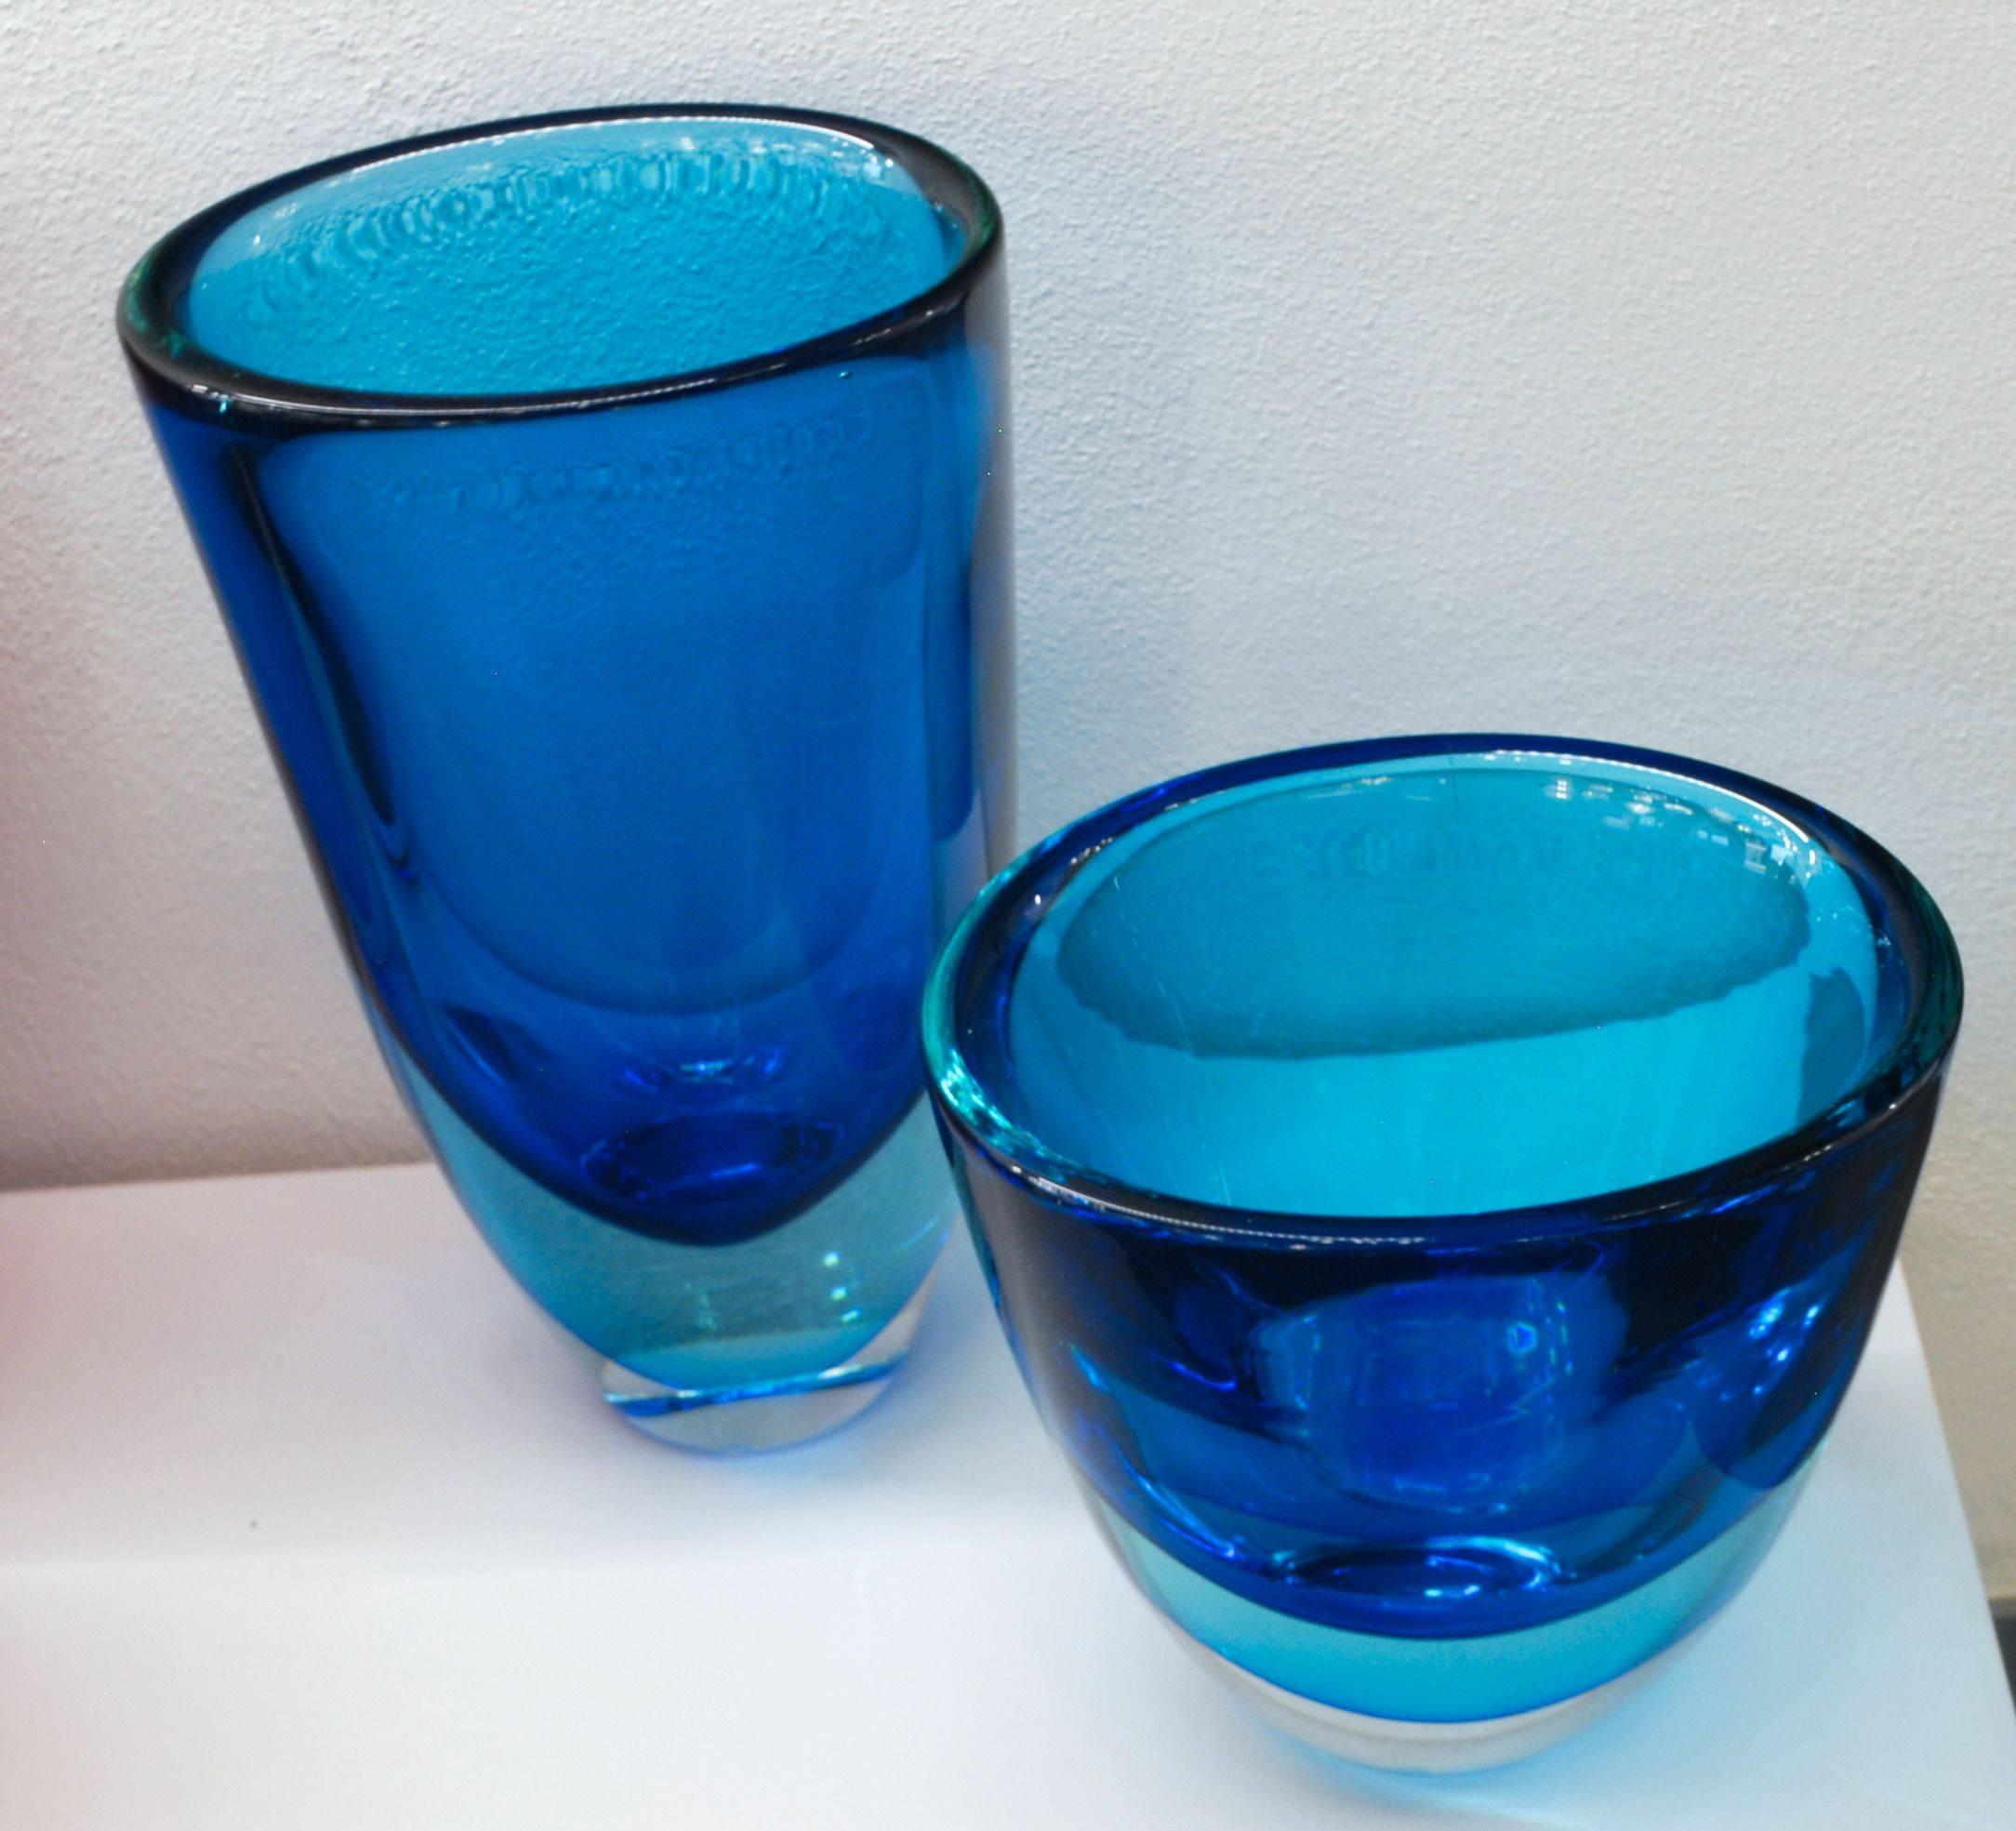 Two aquamarine and cobalt heavy and massif vessels from Stefano Toso. Shape is slightly squashed so has an oval mouth.

A colorful couple of vessel in a fashionable color. To be placed close to a window to catch the light.

There is a taller